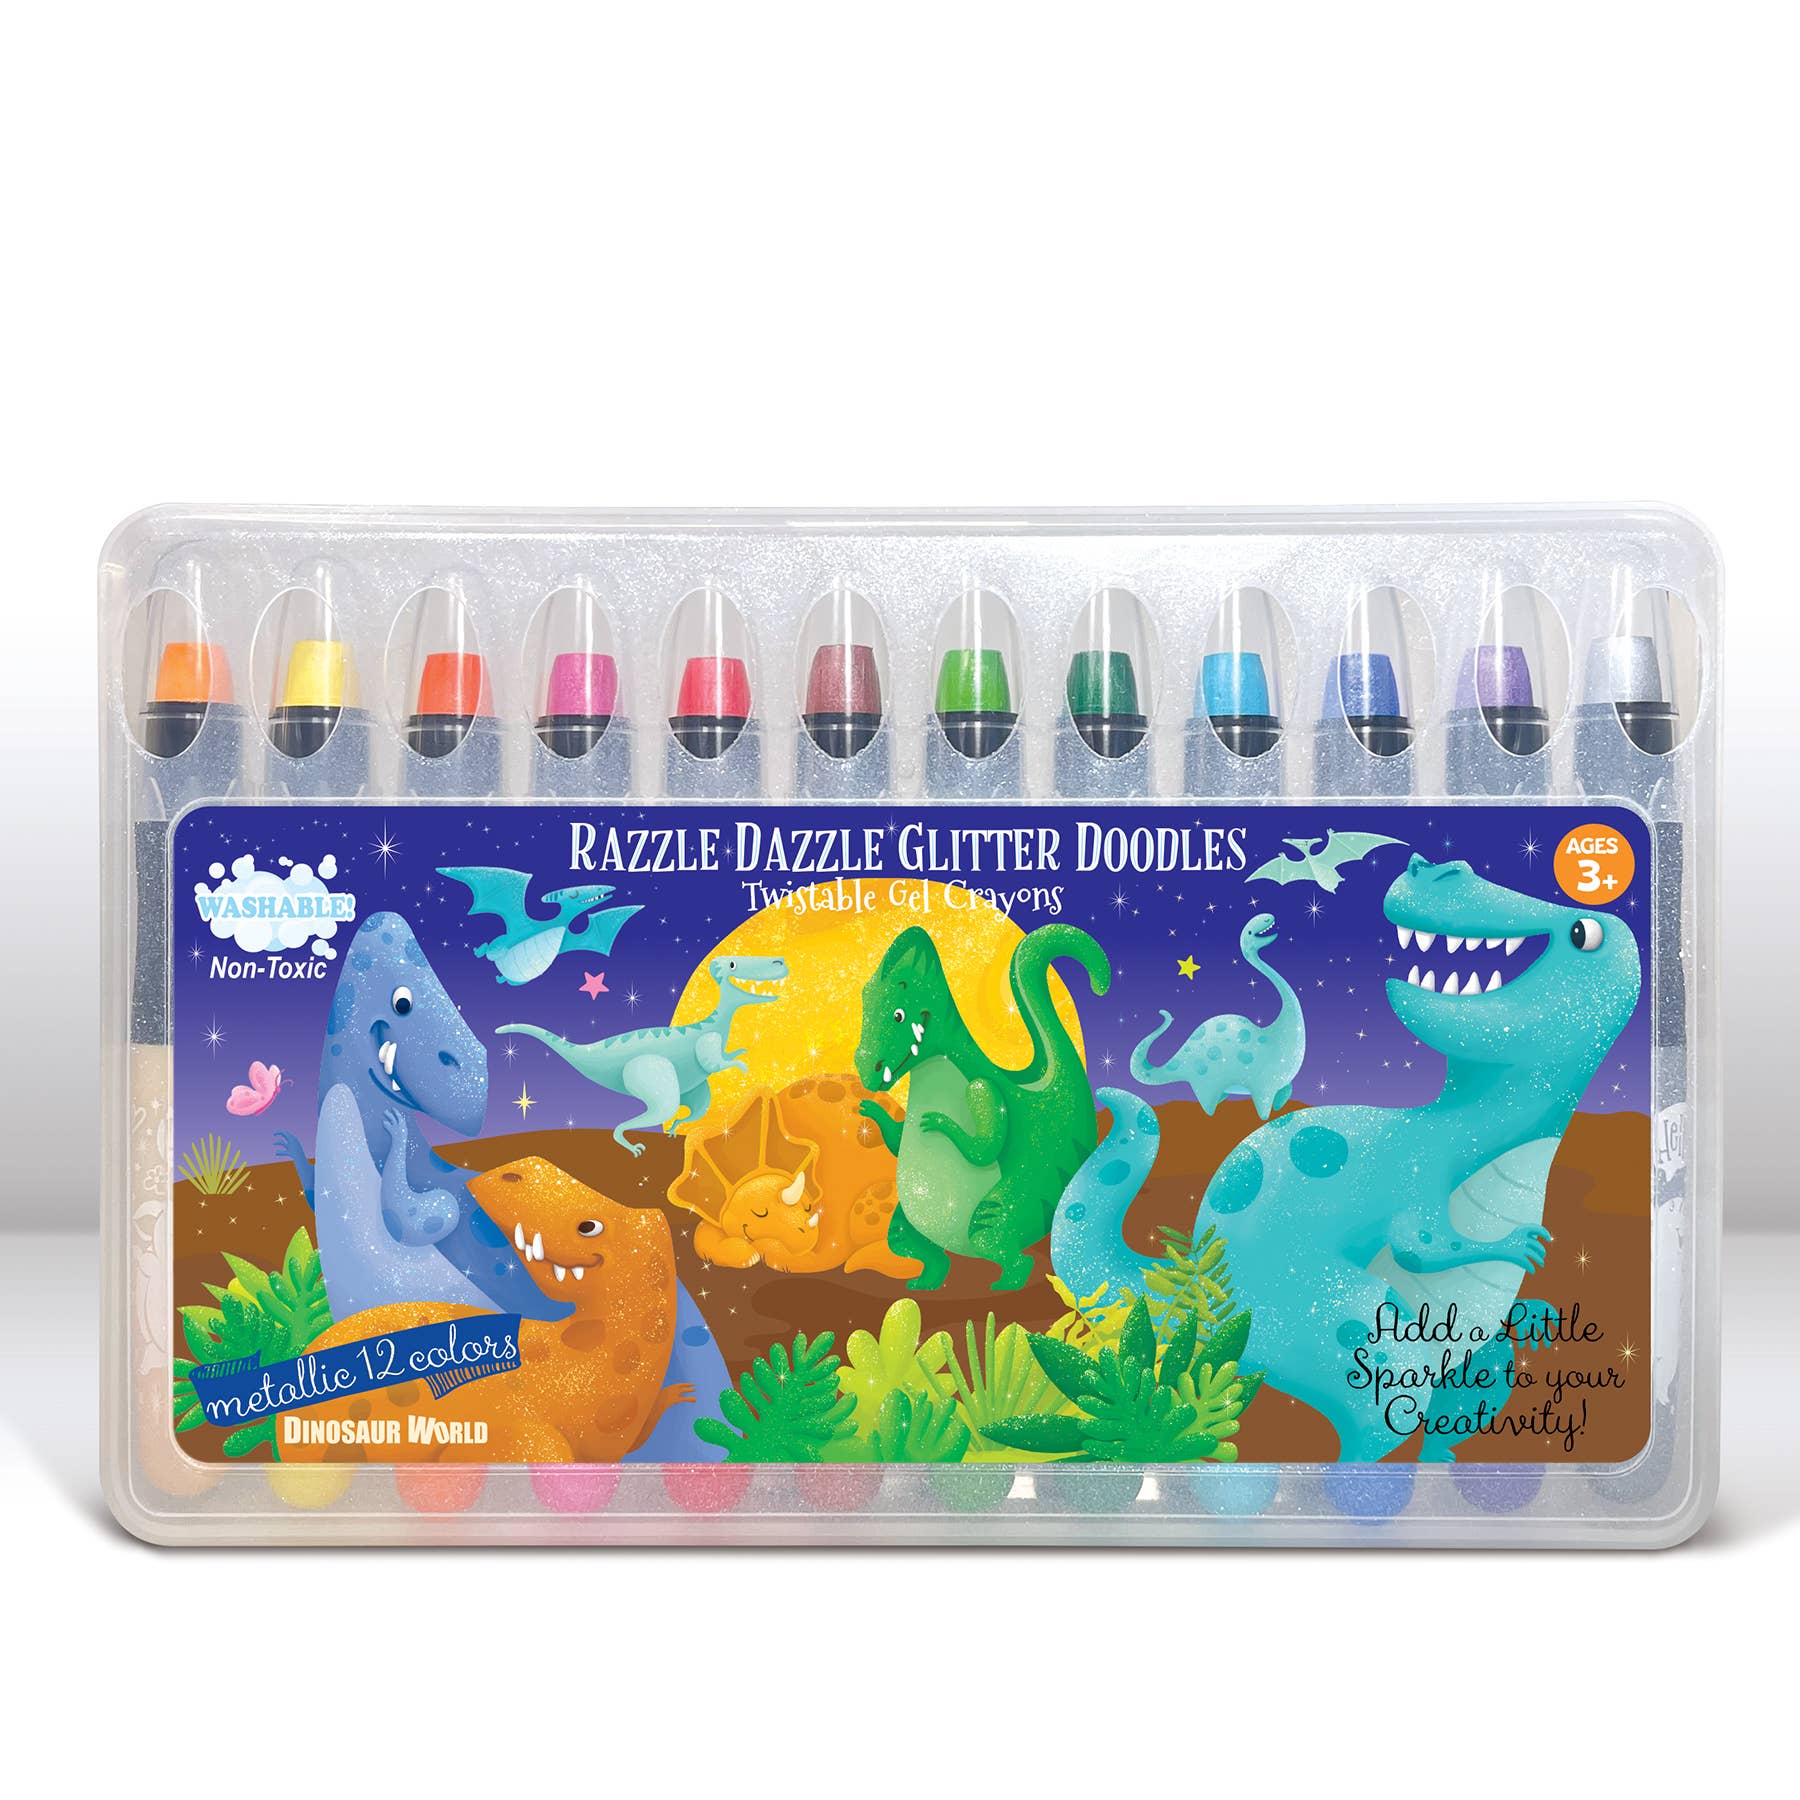 Washable Gel Crayons, Assorted Colors, Non-Toxic Twistable Gel